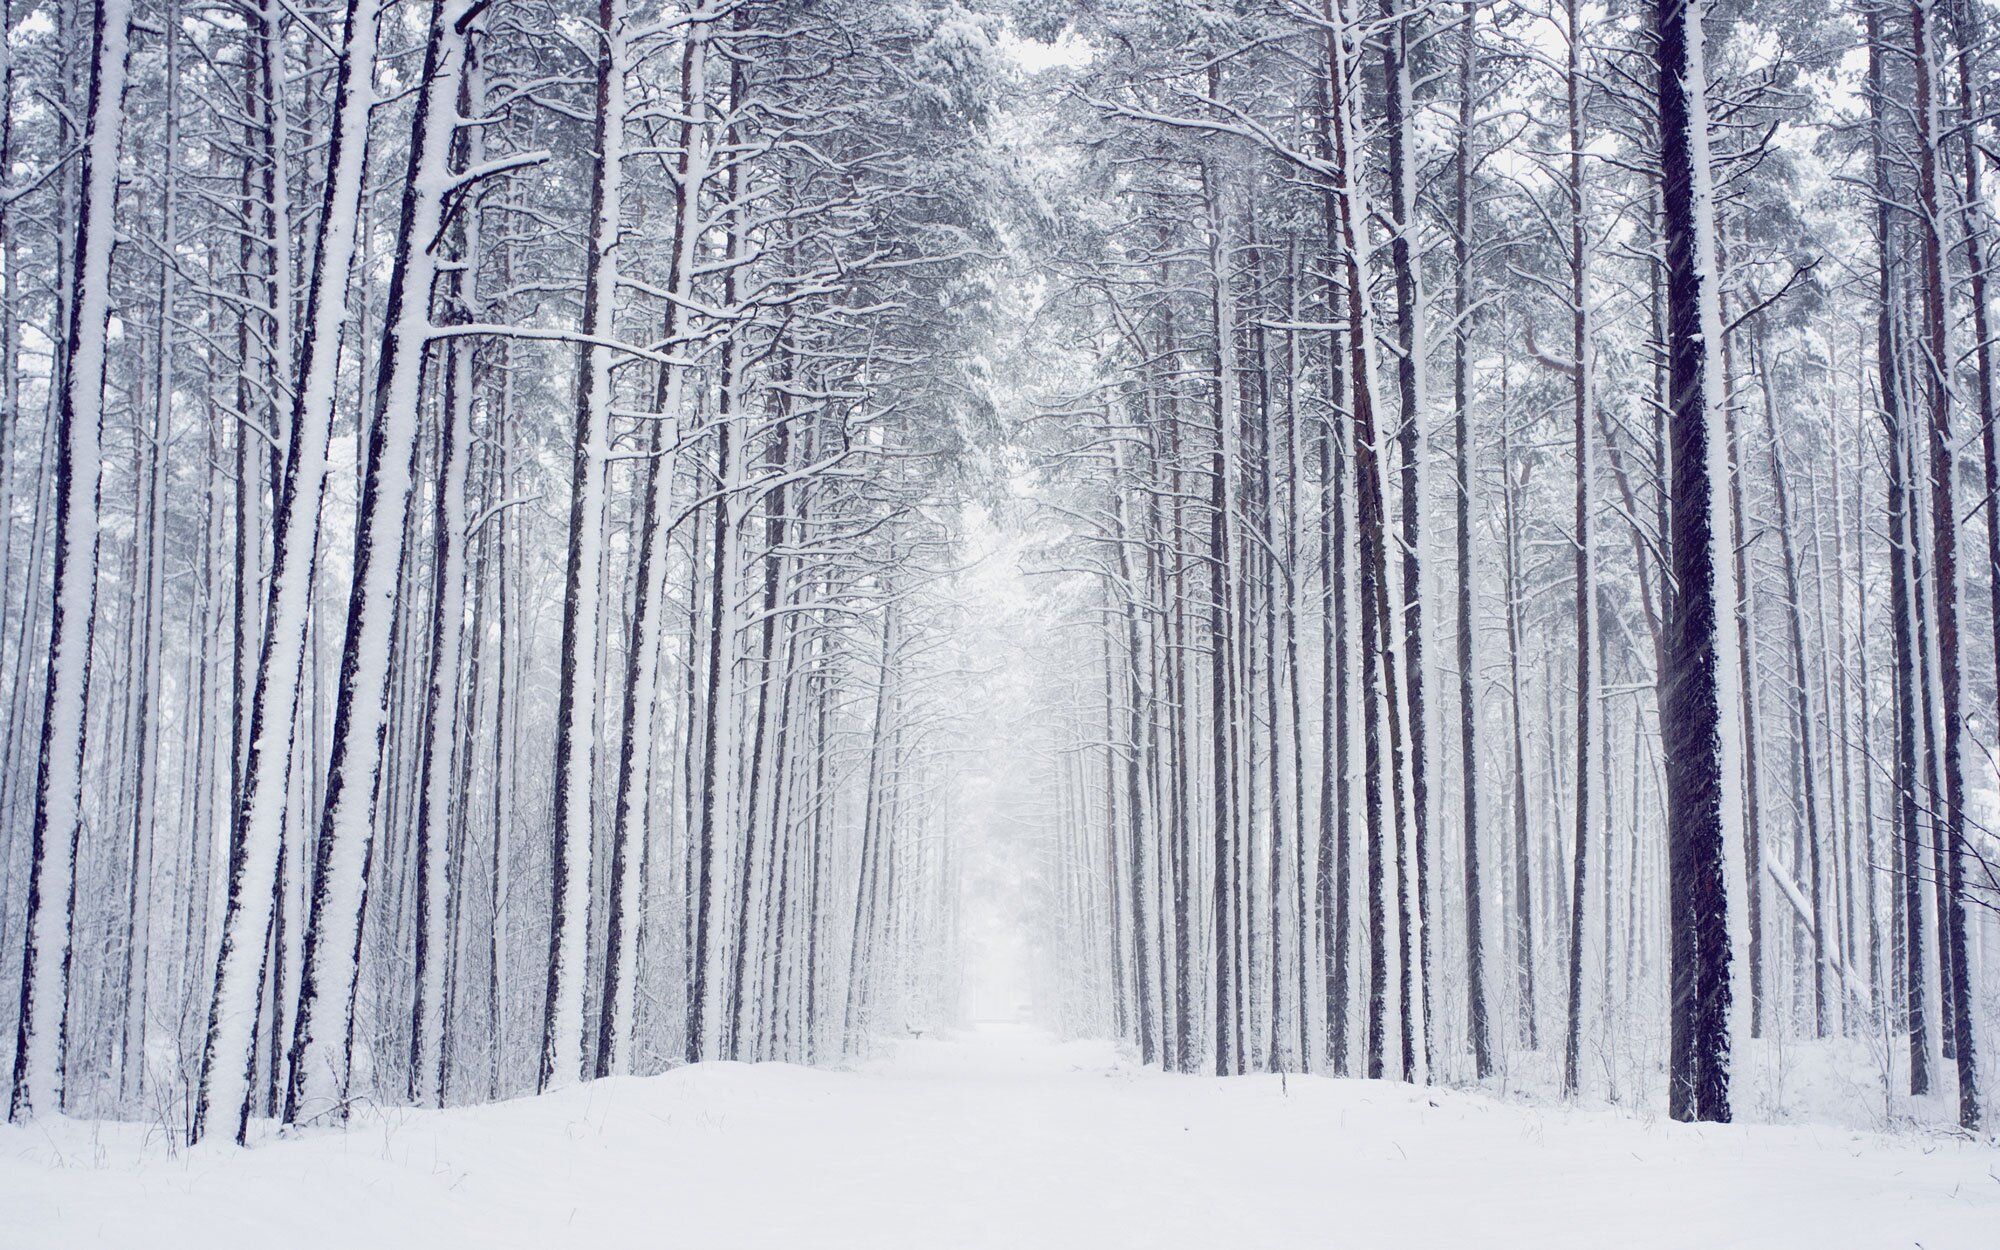 Winter Picture: View Beautiful Image of Winter Scenes. Travel + Leisure